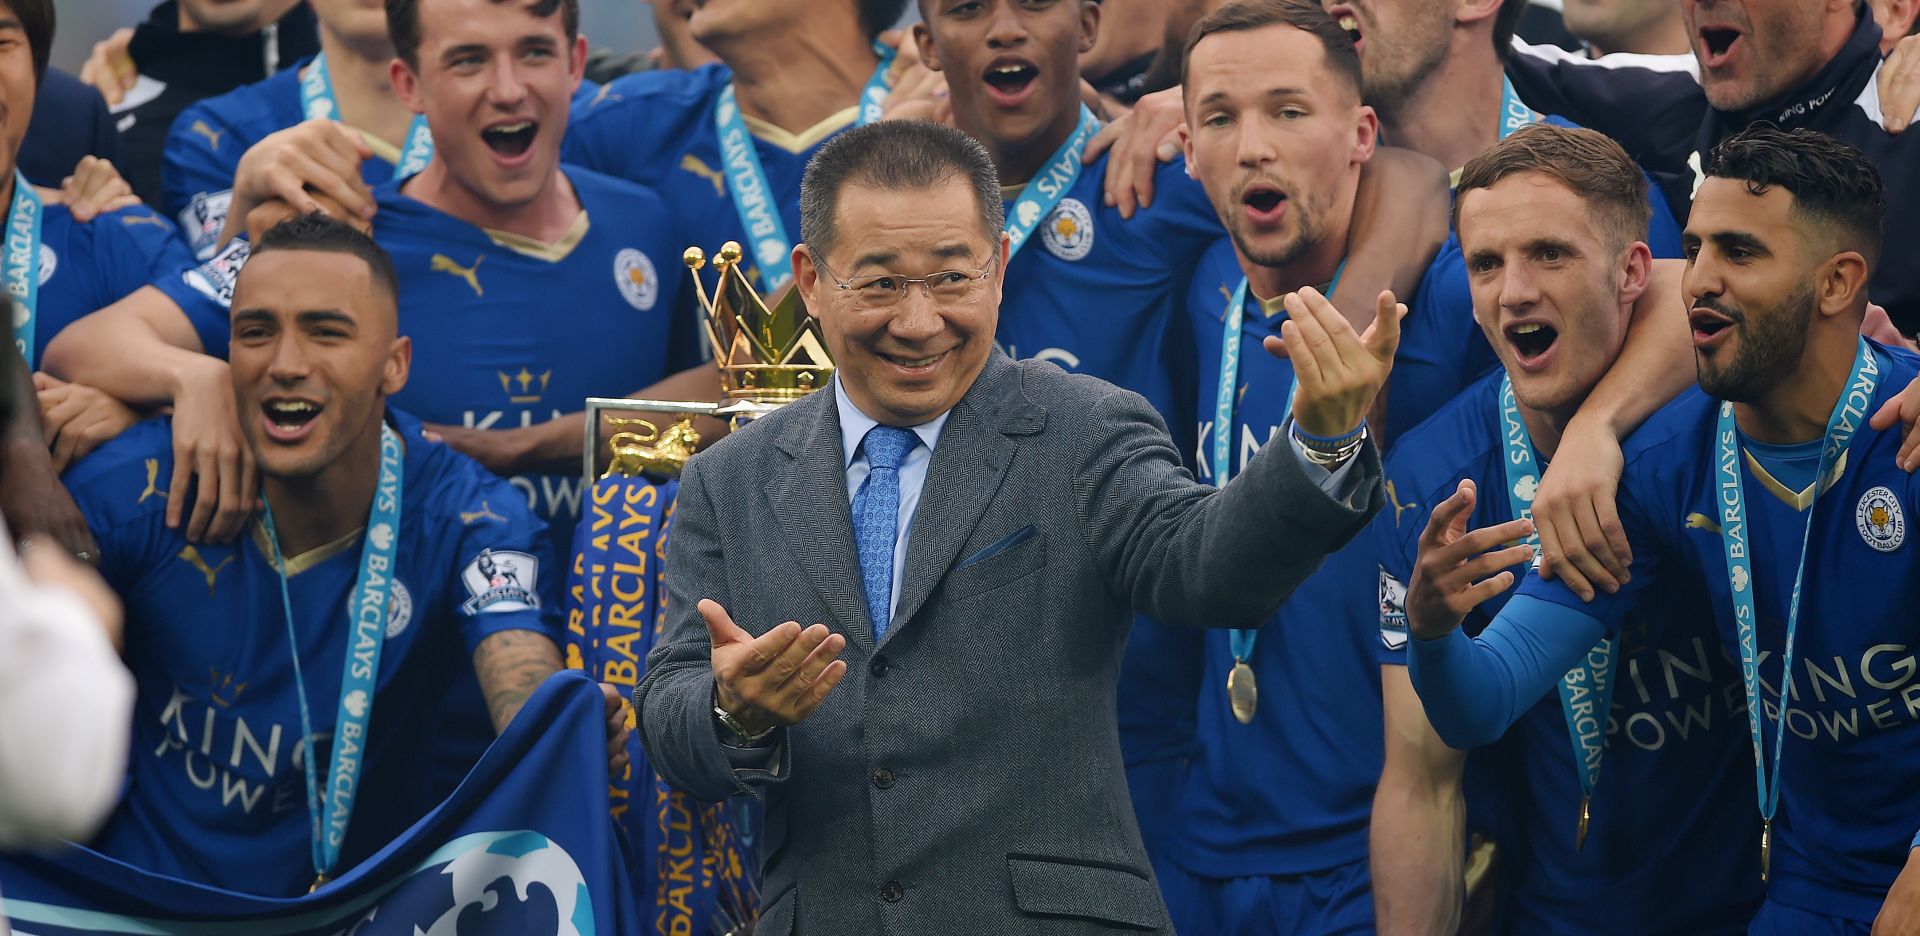 epa07125845 (FILE) - Leicester City's owner Vichai Srivaddhanaprabha (C) reacts after lifting the Premier League trophy after the English Premier League match between Leicester City and Everton at the King Power Stadium Leicester in Leicester, Britain, 07 May 2016. According to reports on 27 October 2018, a helicopter of Leicester City owner Vichai Srivaddhanaprabha, has crashed and burst into flames outside King Power Stadium in Leicester after the Premier League soccer match between Leicester City and West Ham United. It is still unclear if Srivaddhanaprabha was onboard.  EPA/PETER POWELL EDITORIAL USE ONLY. No use with unauthorized audio, video, data, fixture lists, club/league logos or 'live' services. Online in-match use limited to 75 images, no video emulation. No use in betting, games or single club/league/player publications *** Local Caption *** 52743251